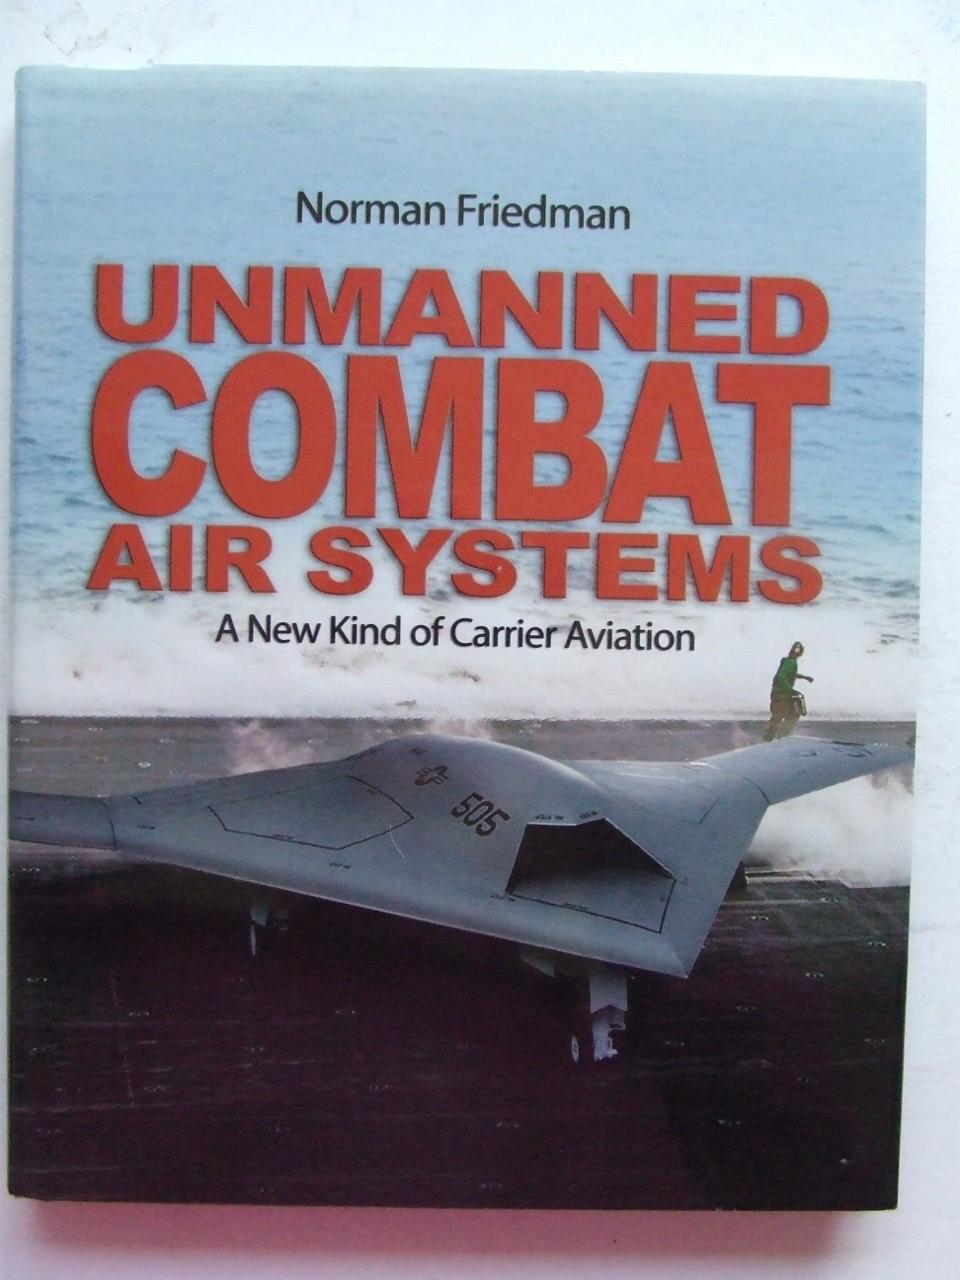 Unmanned Combat Air Systems, a new kind of carrier aviation - Friedman, Norman